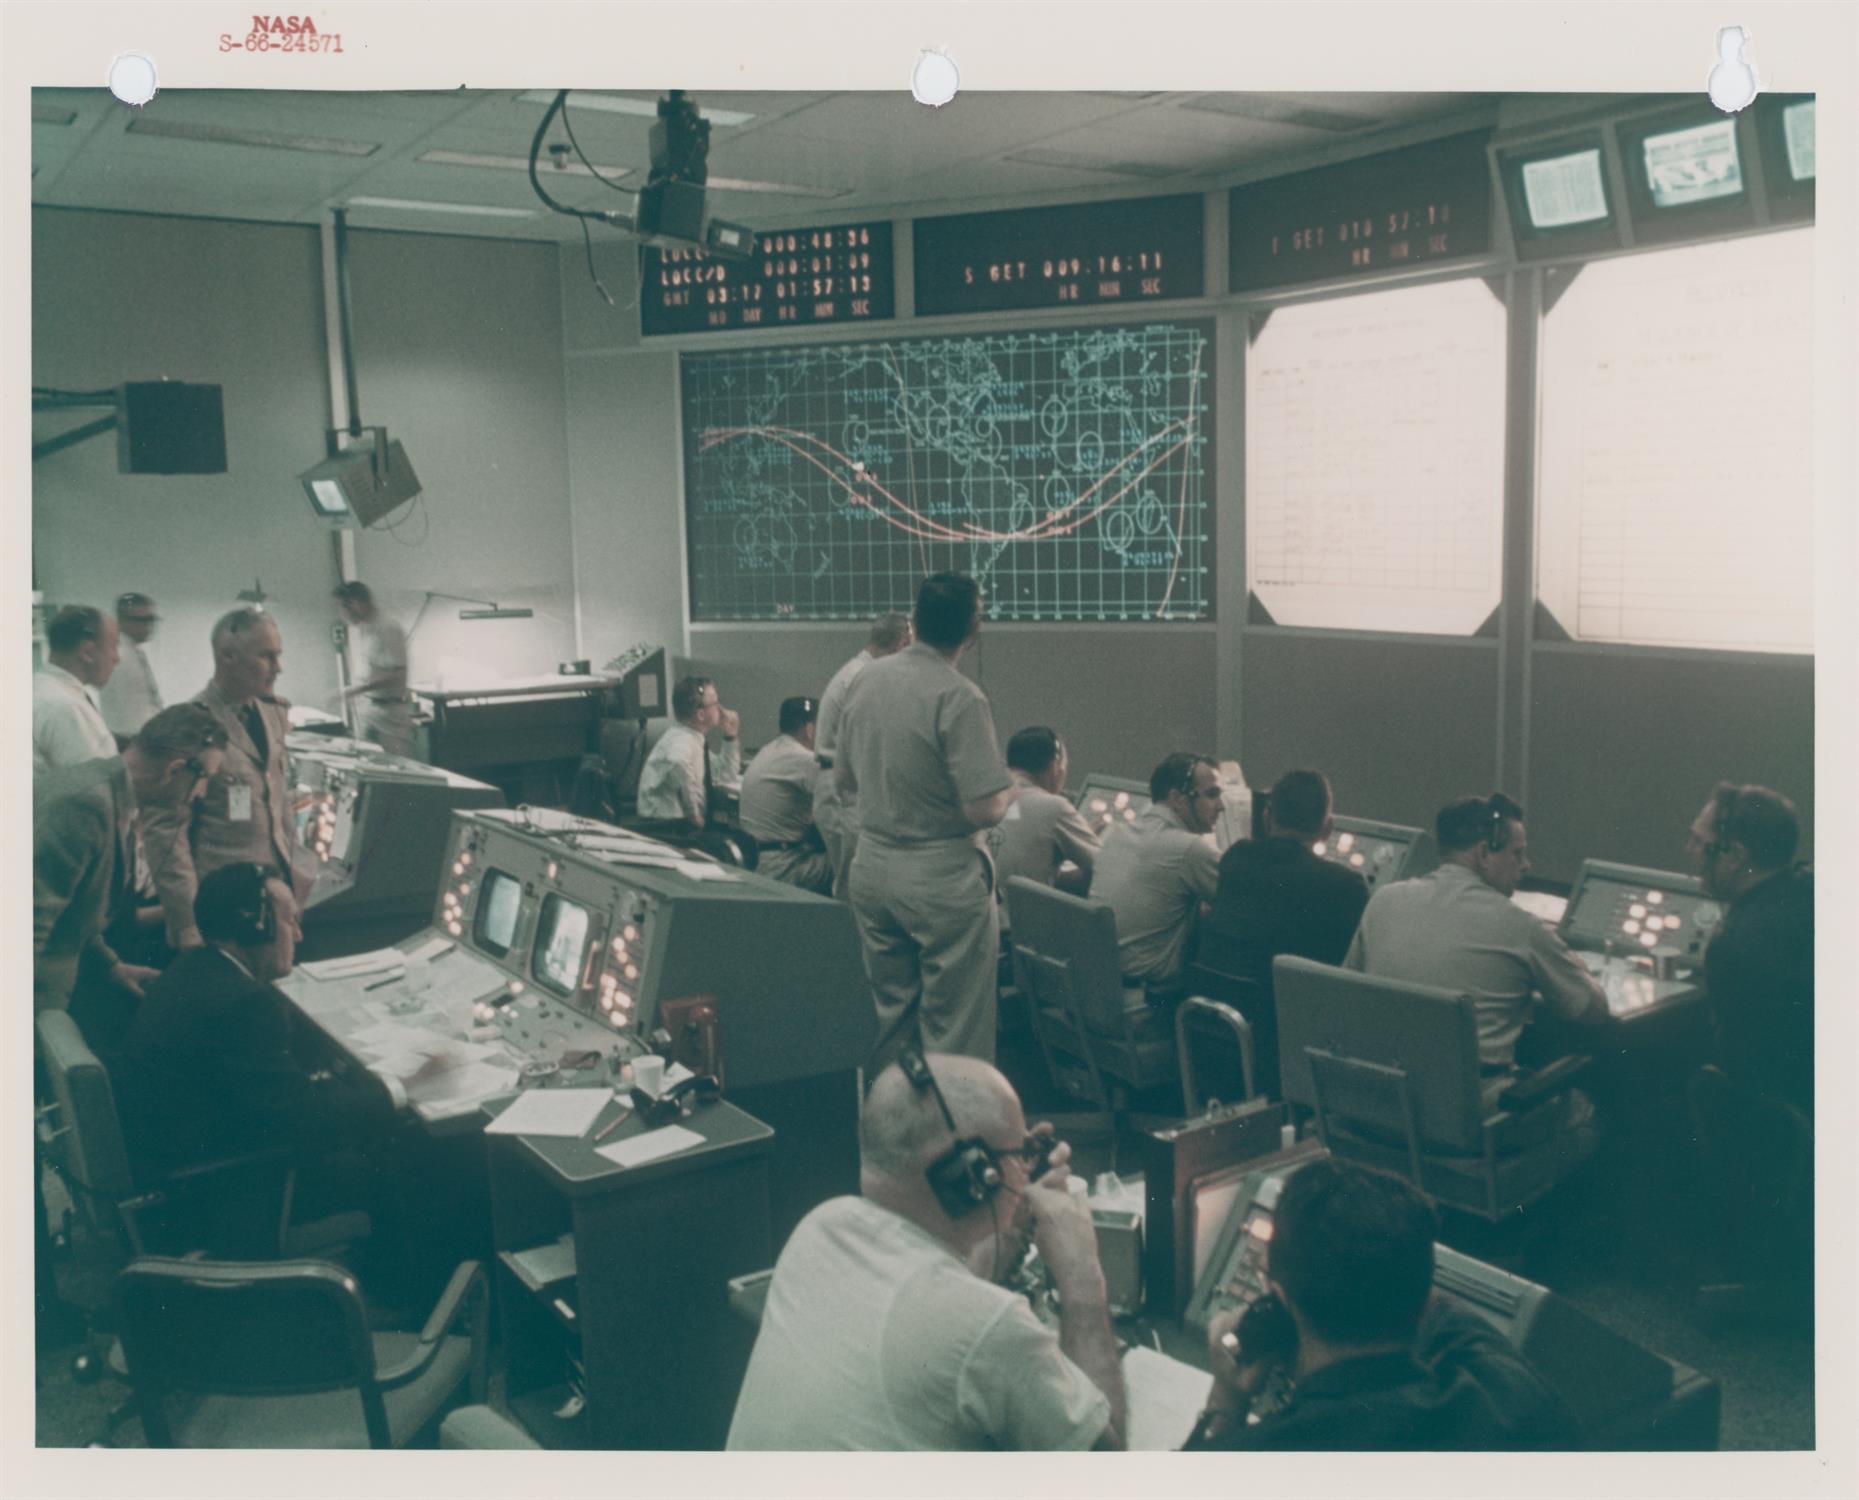 Pre-flight press conference and Mission Control during emergency recovery, Gemini 8, February 1966 - Image 4 of 5